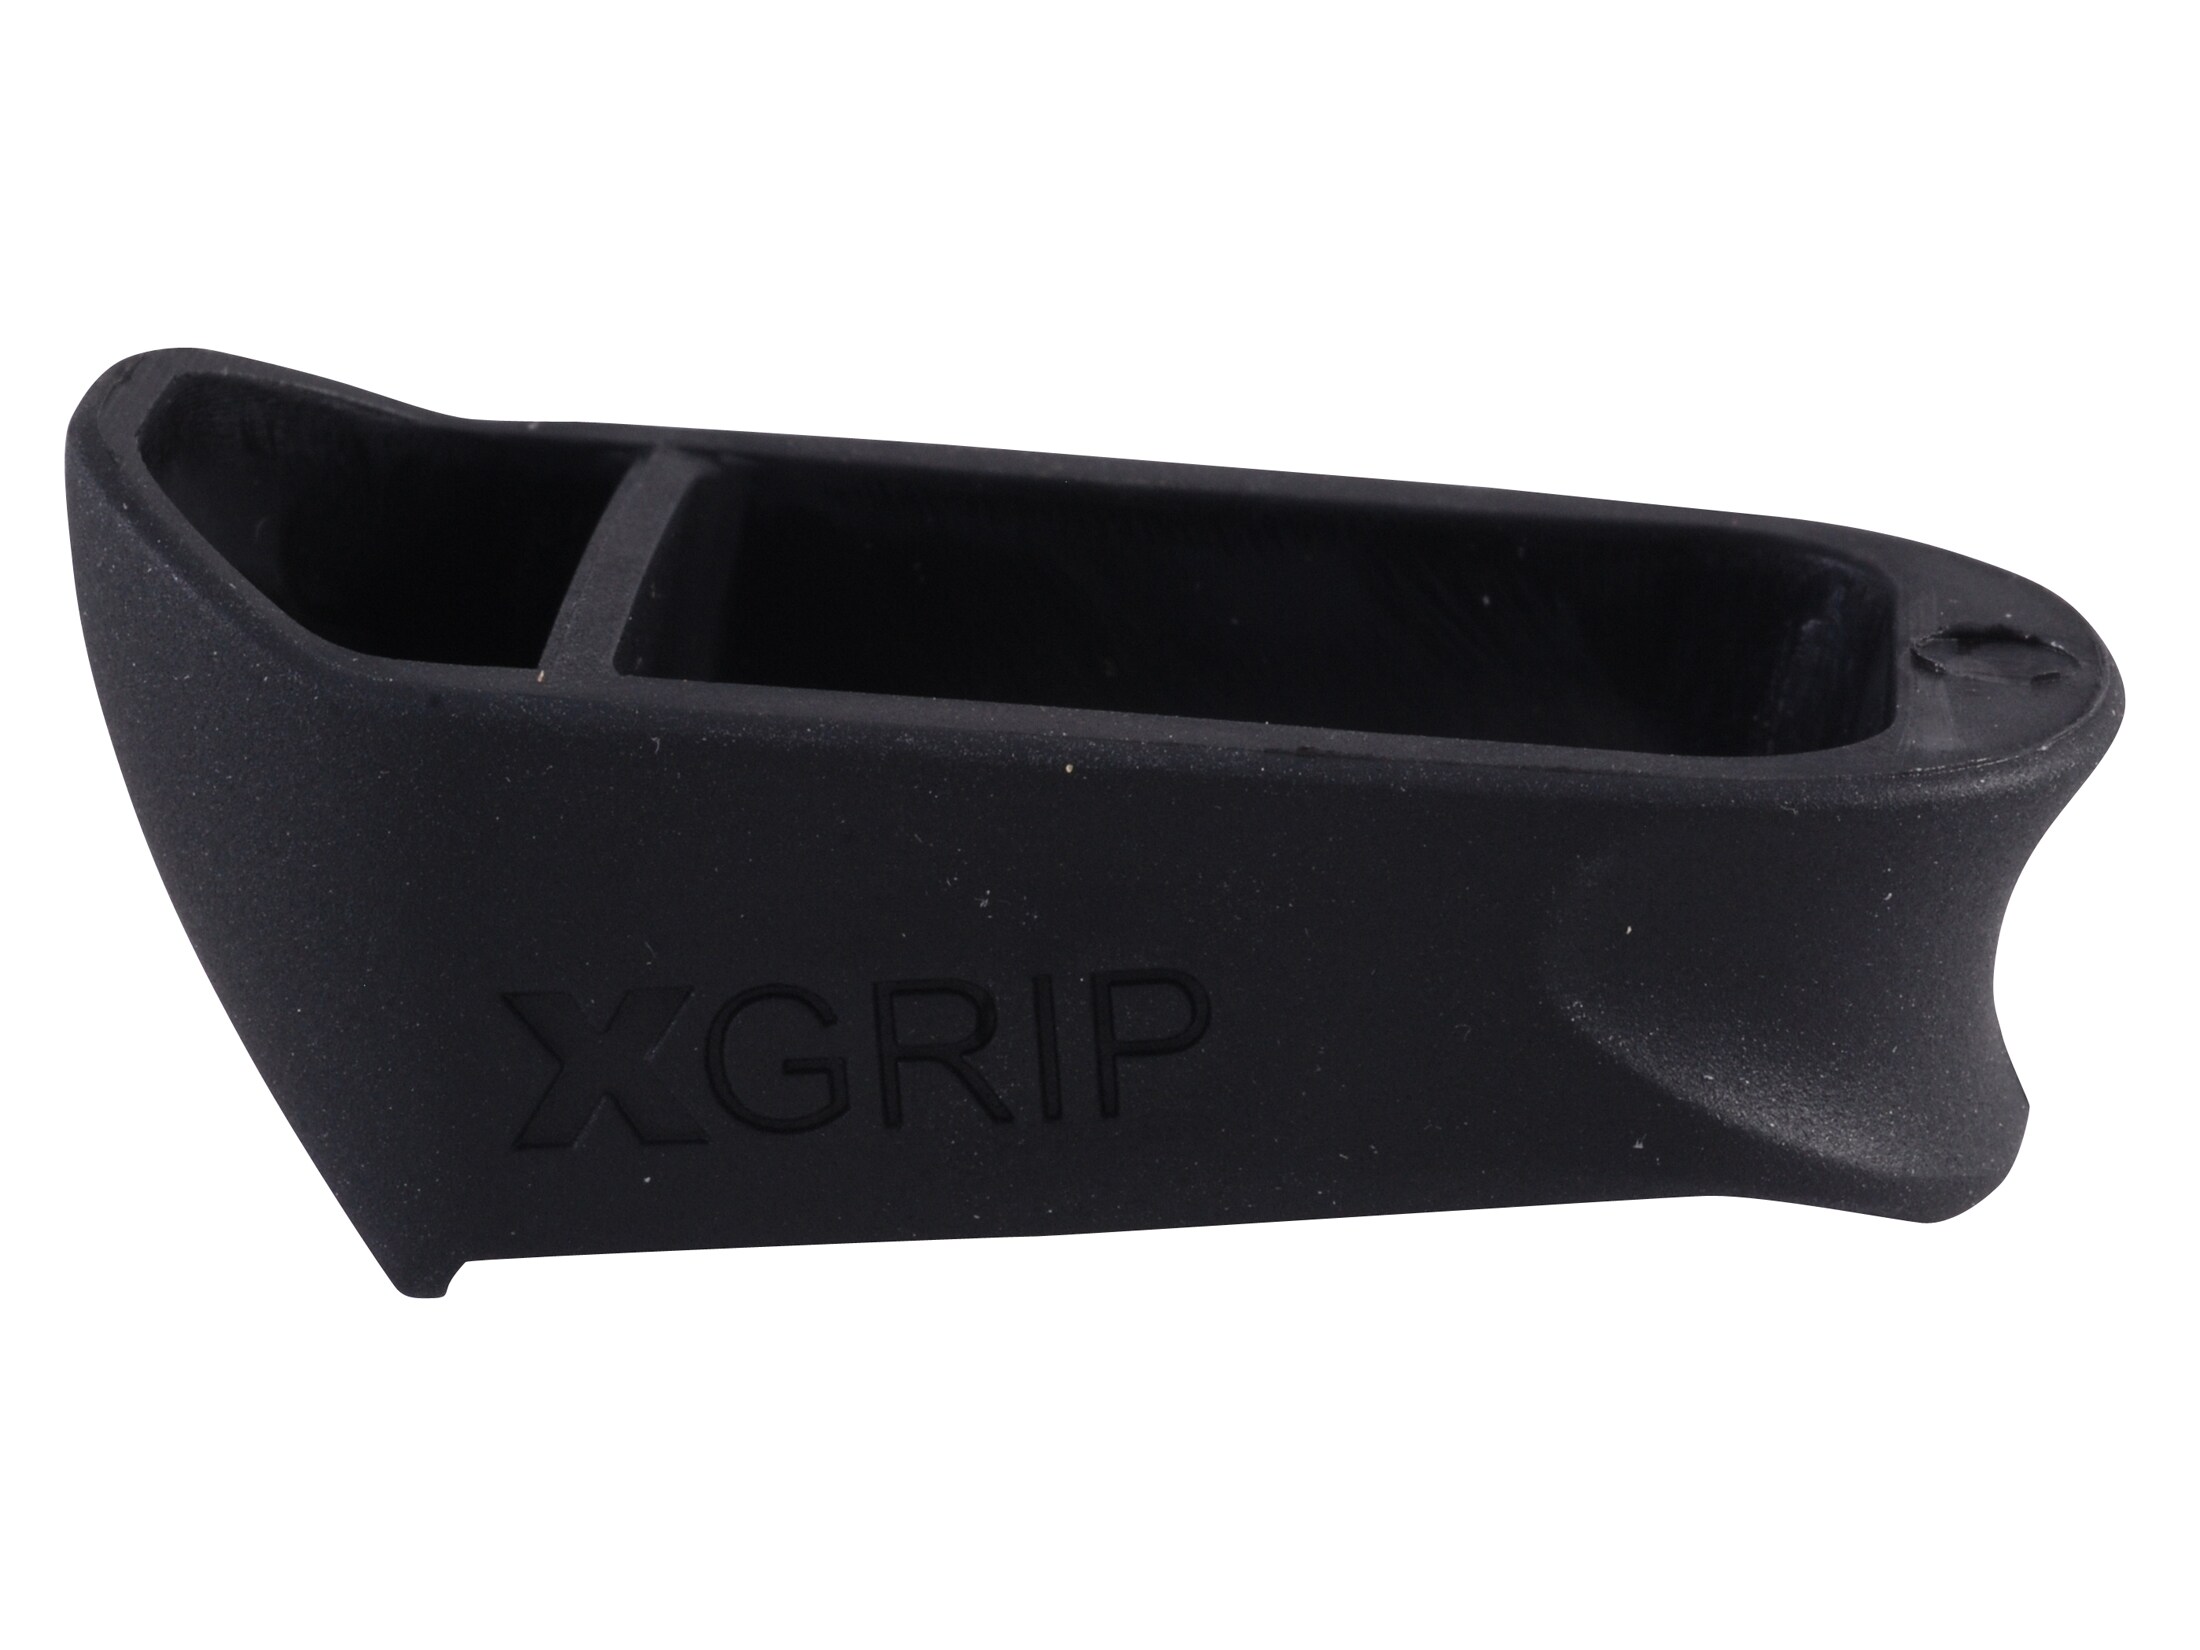 Tactical Grip Extension PG-19 for Glock 19/23 Mag Grip Base Plate Black 